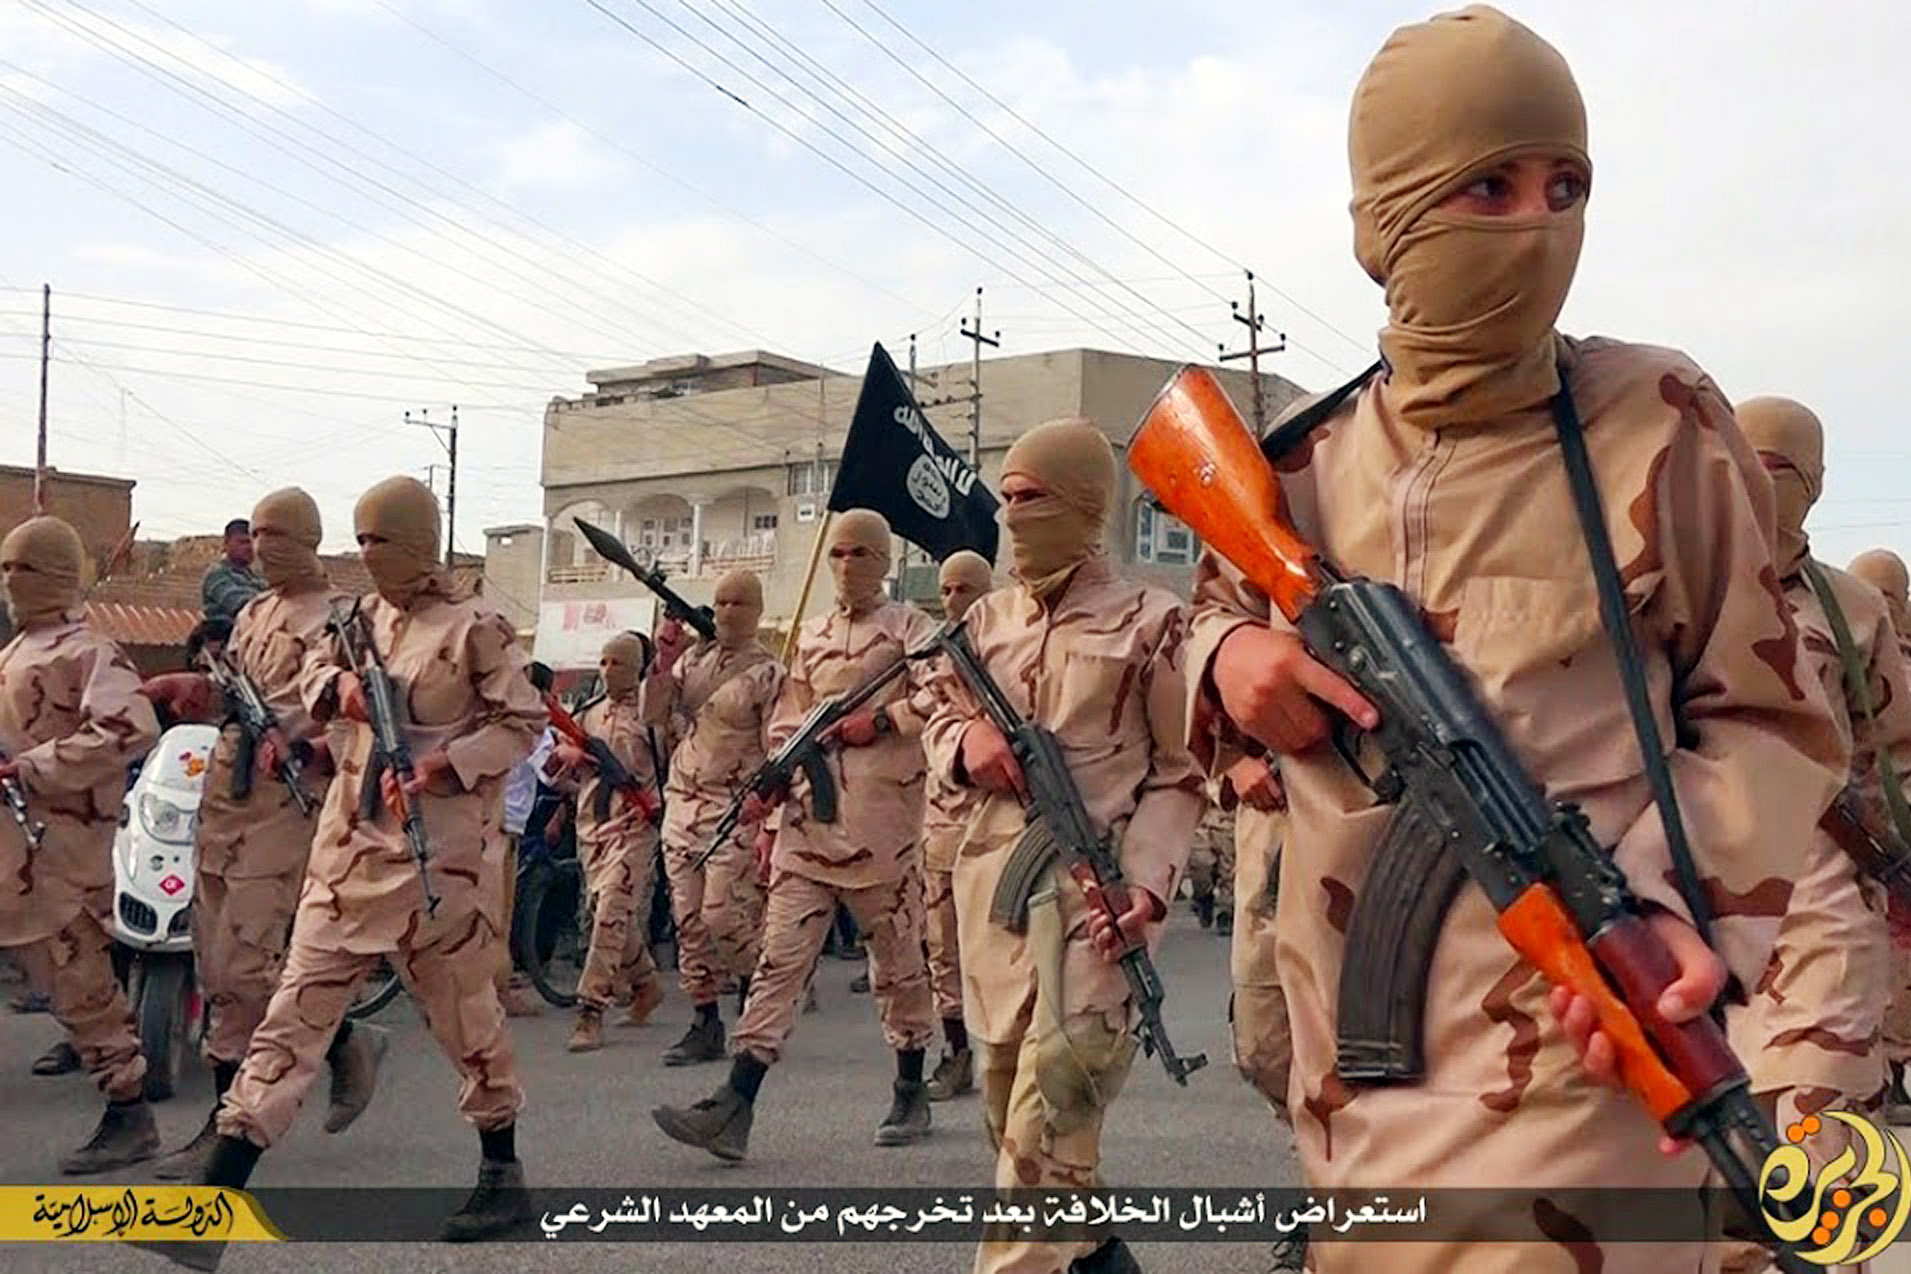 ADVANCE FOR USE SUNDAY, JULY 19, 2014 AT 1 P.M. EDT (17:00 GMT) AND THEREAFTER - In this photo released on April 25, 2015 by a militant website, which has been verified and is consistent with other AP reporting, young boys known as the "caliphate cubs" hold rifles during a parade after graduating from a religious school in Tal Afar, near Mosul, northern Iraq. The Syrian Observatory for Human Rights, a Britain-based outfit that follows the Syrian war, said it documented at least 1,100 Syrian children under 16 who joined IS so far this year, many of whom were then sent to fight in Syria and Iraq. (Militant website via AP)